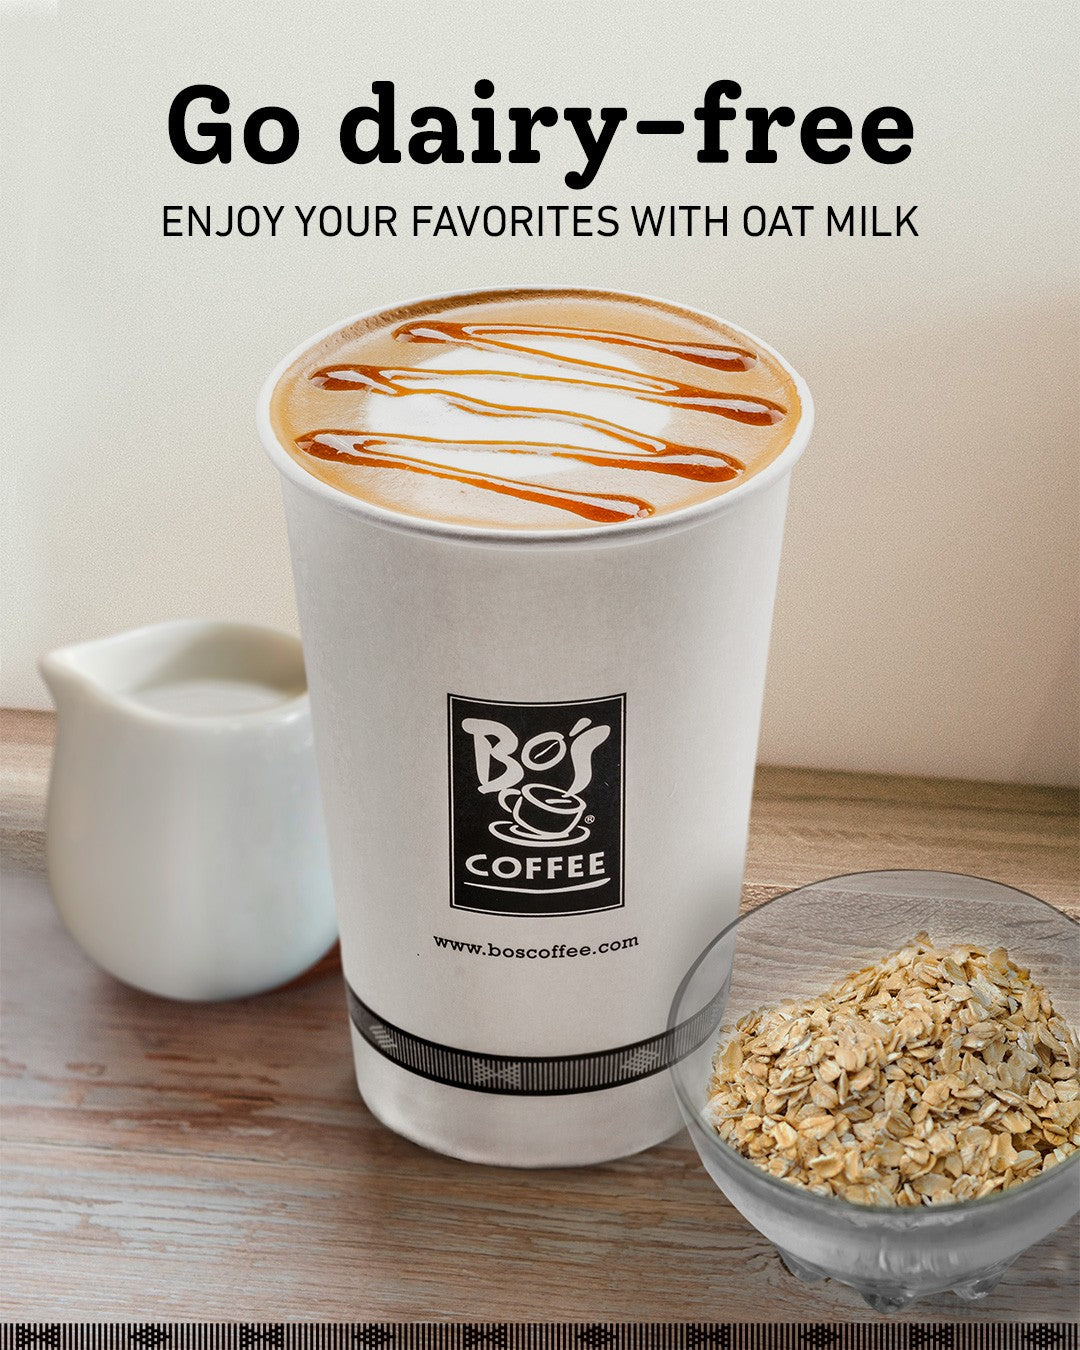 Go Dairy-free enjoy your favorite with oat milk